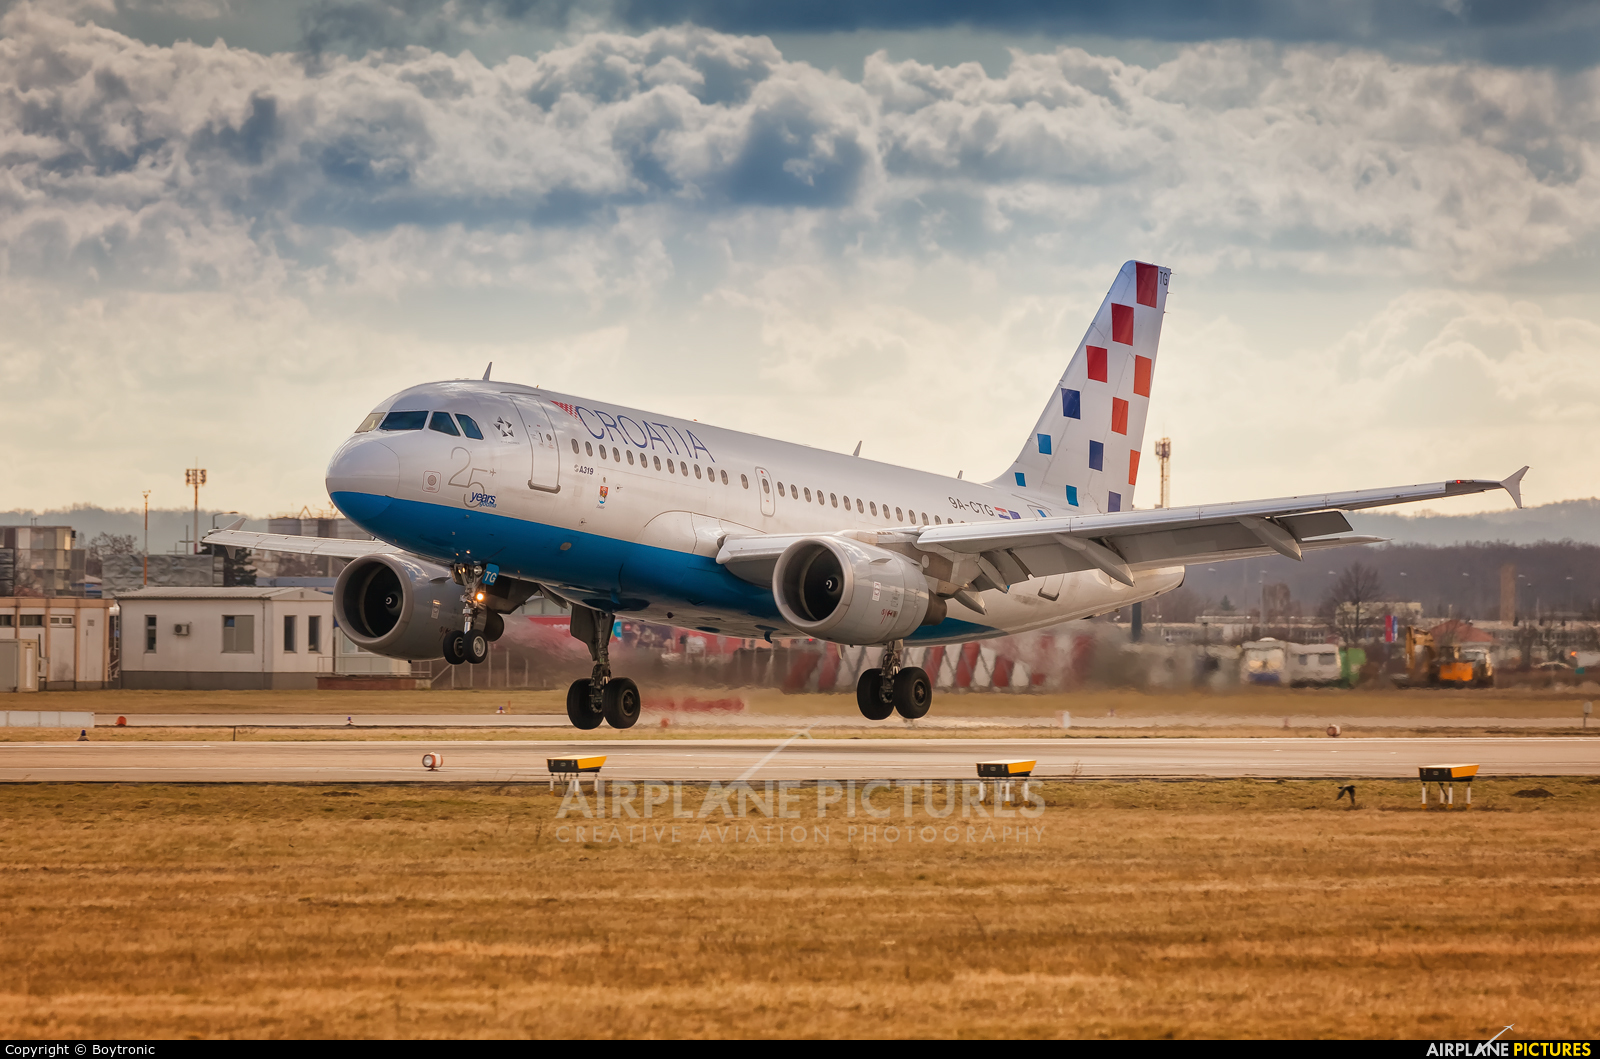 Croatia Airlines 9A-CTG aircraft at Zagreb